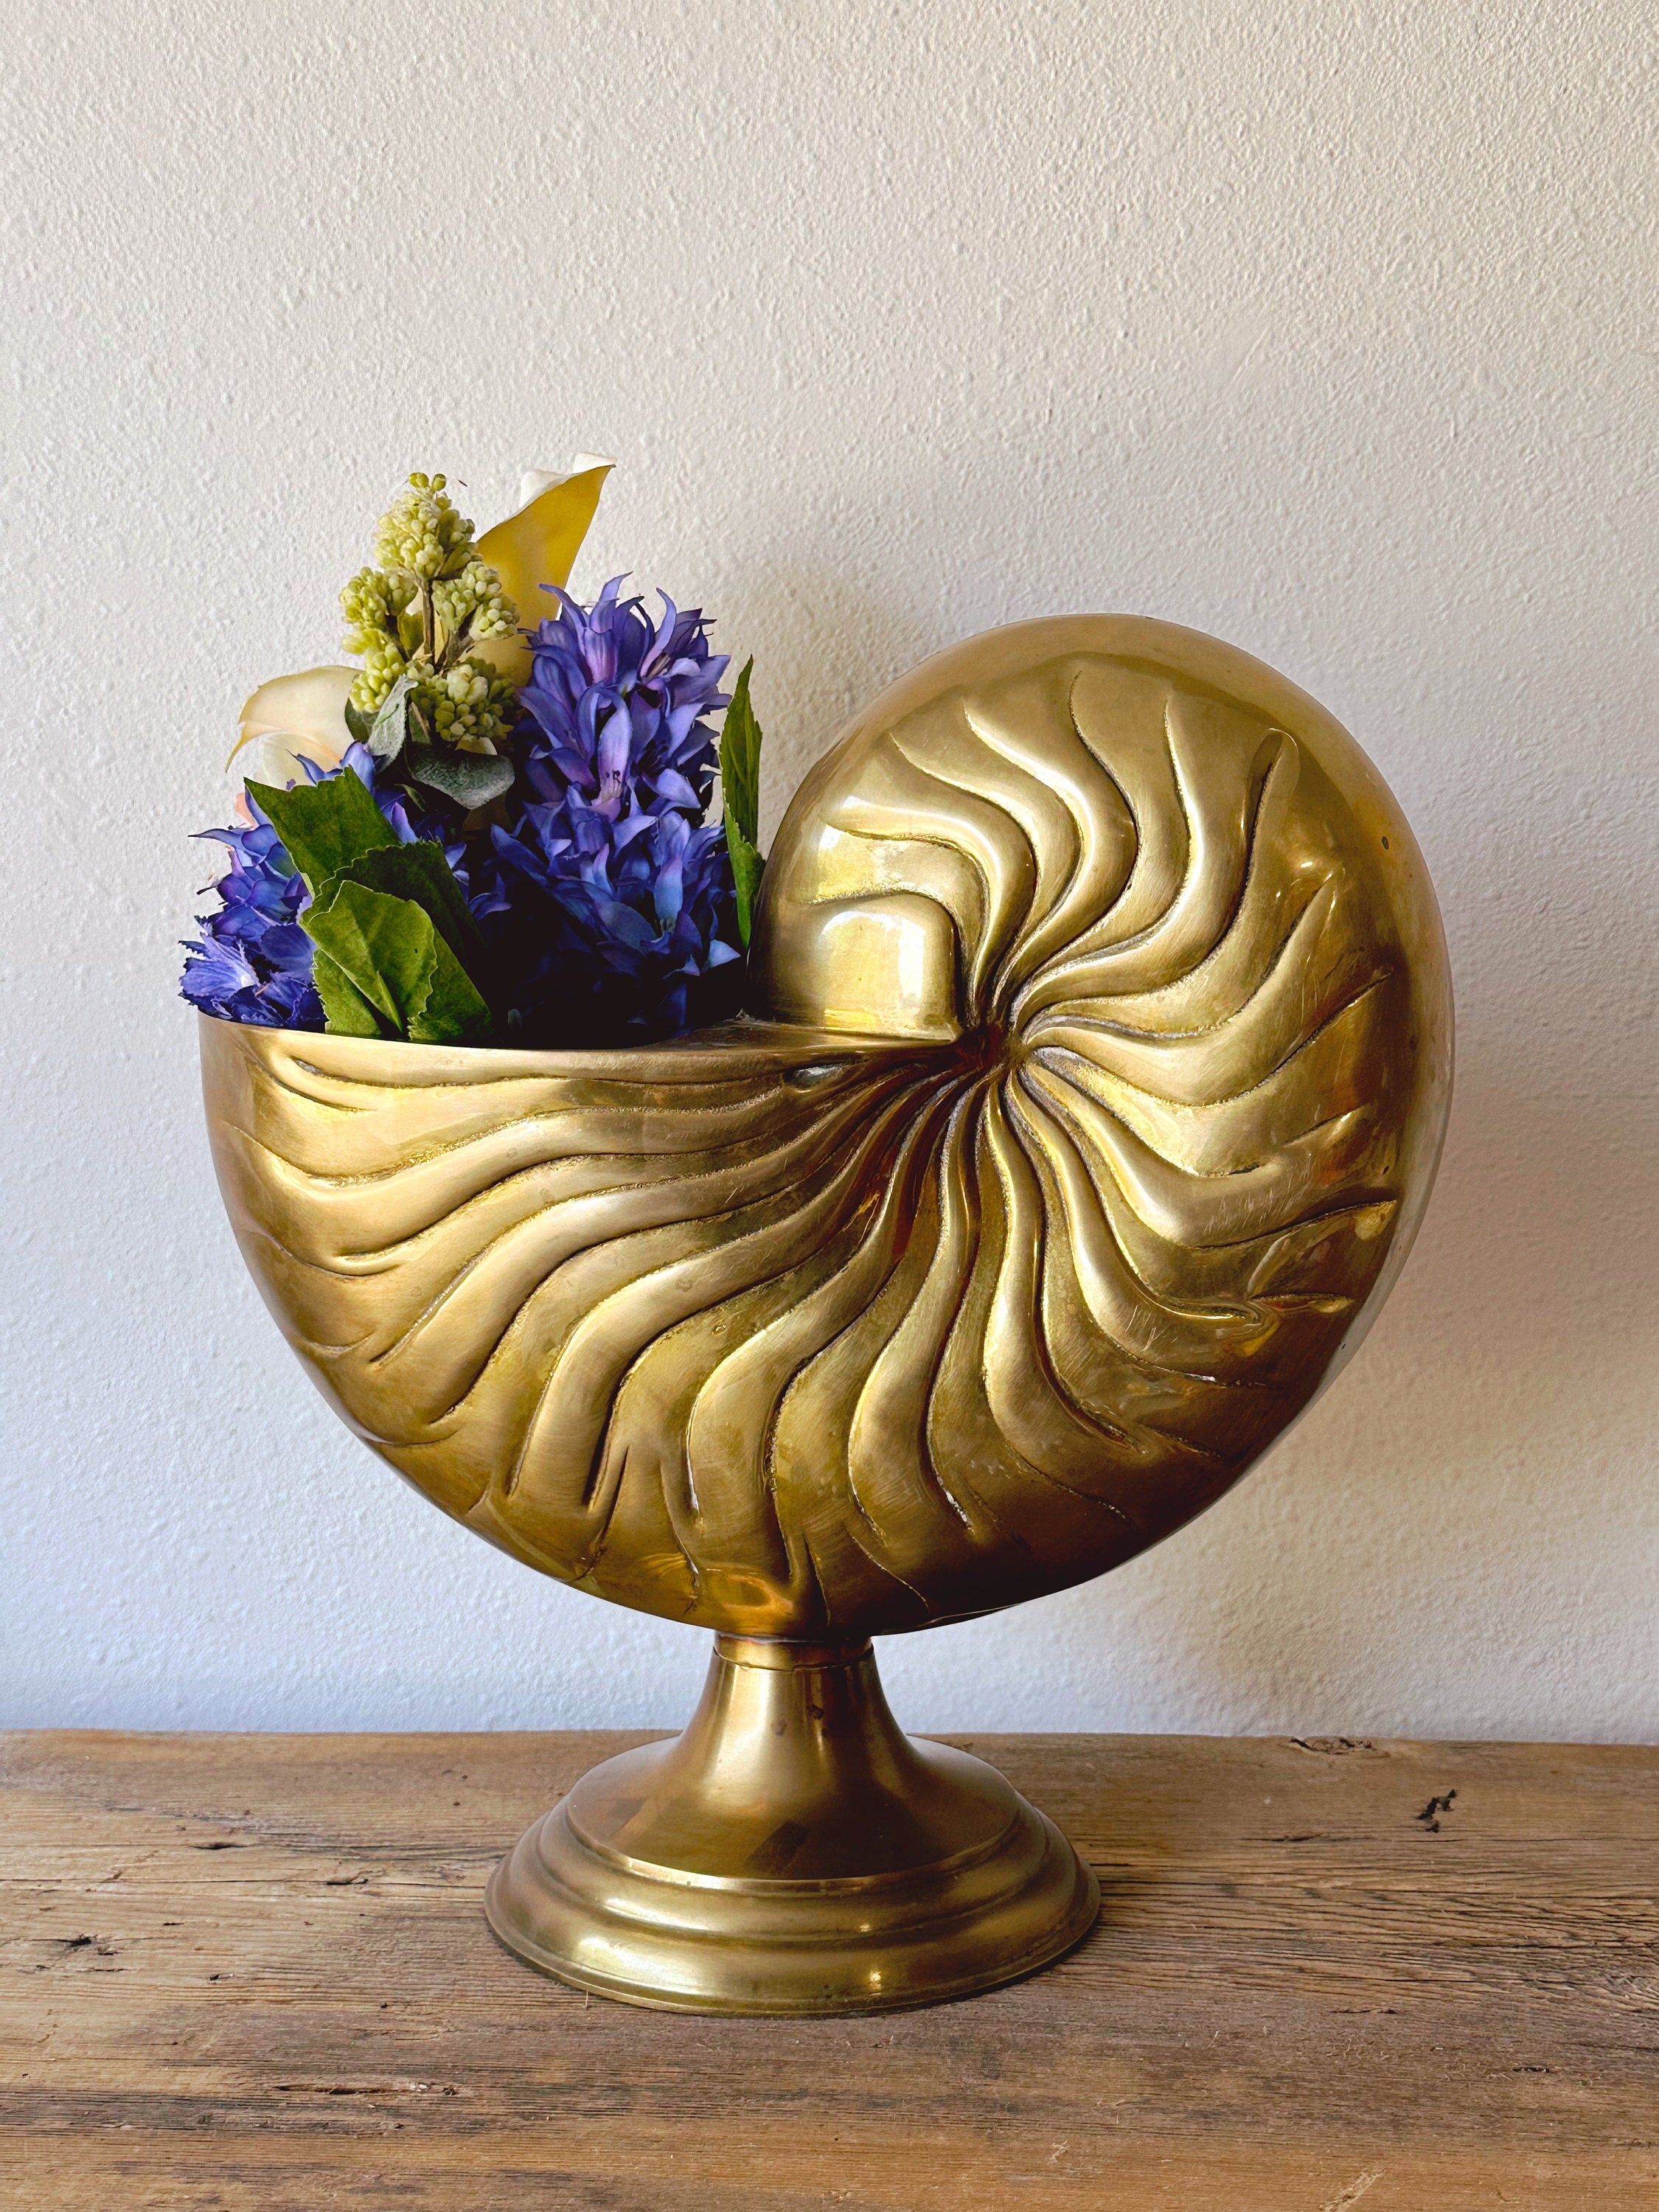 Large Vintage Silver Plate Nautilus Shell Vase Centerpiece Planter For Sale  on Ruby Lane